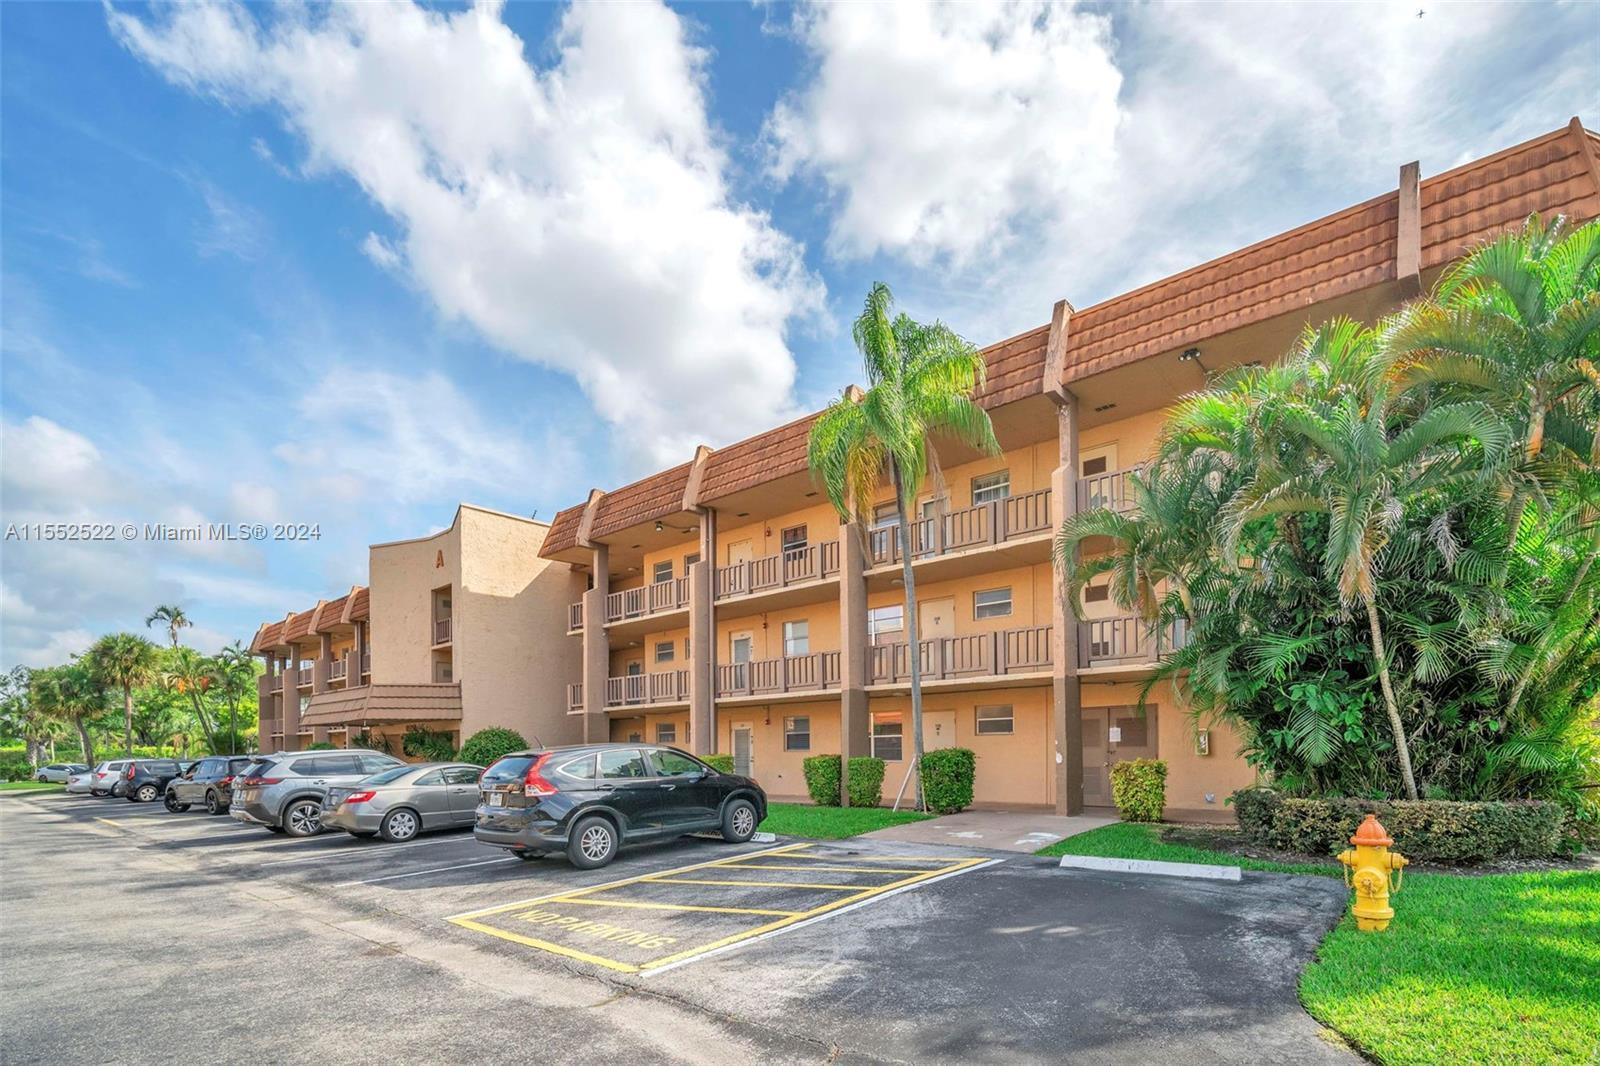 Photo of 6550 Royal Palm Blvd #108A in Margate, FL